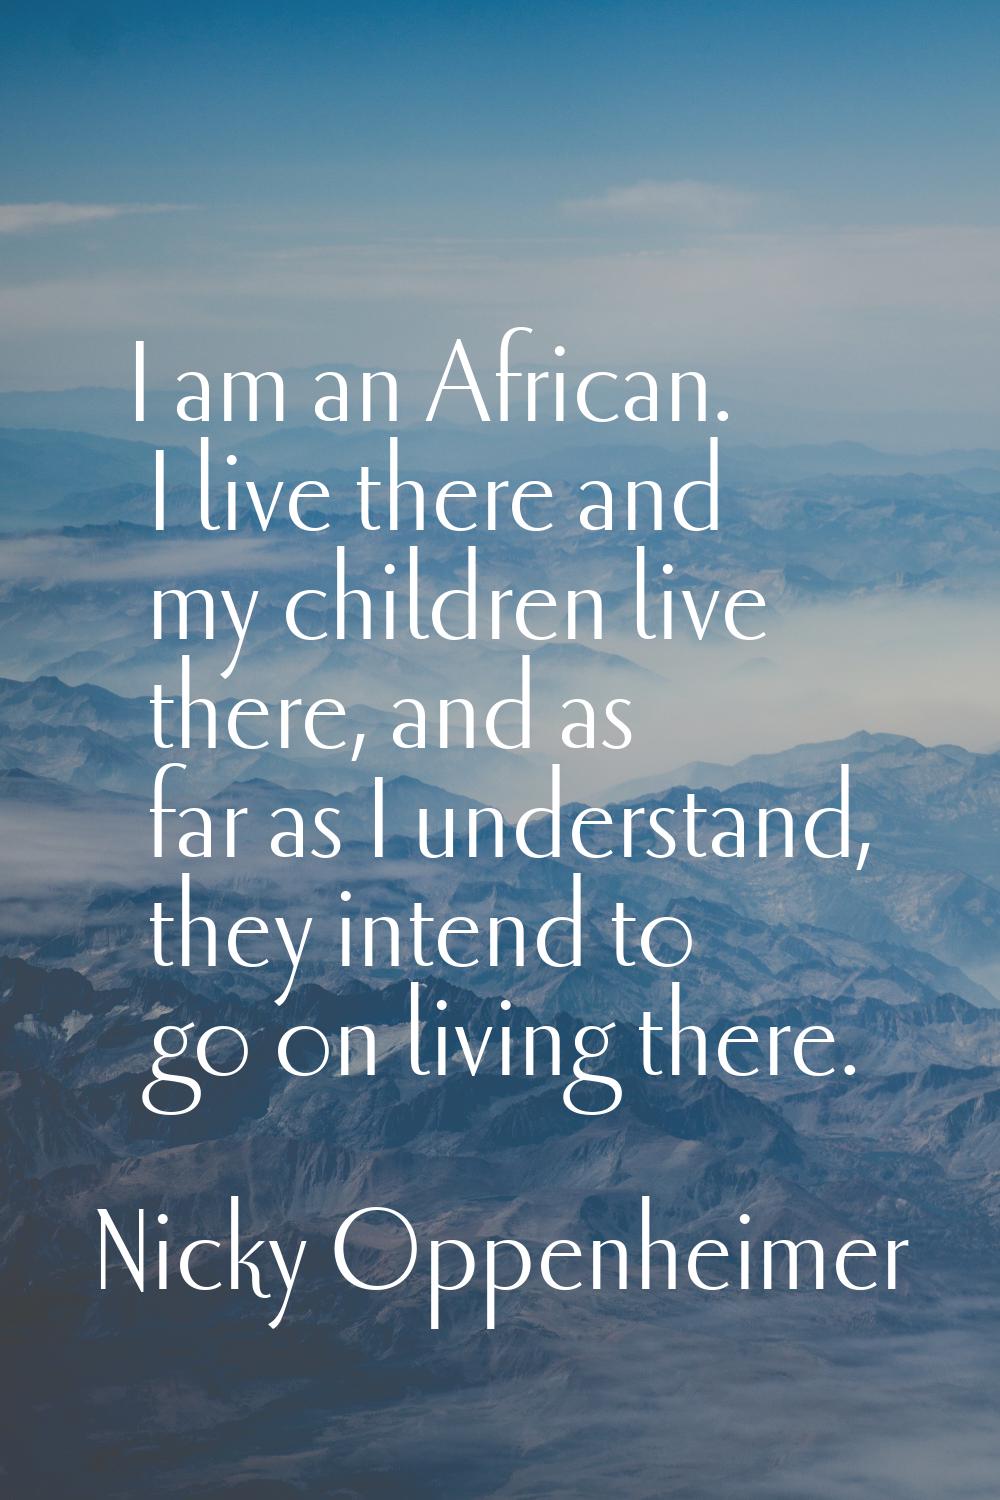 I am an African. I live there and my children live there, and as far as I understand, they intend t